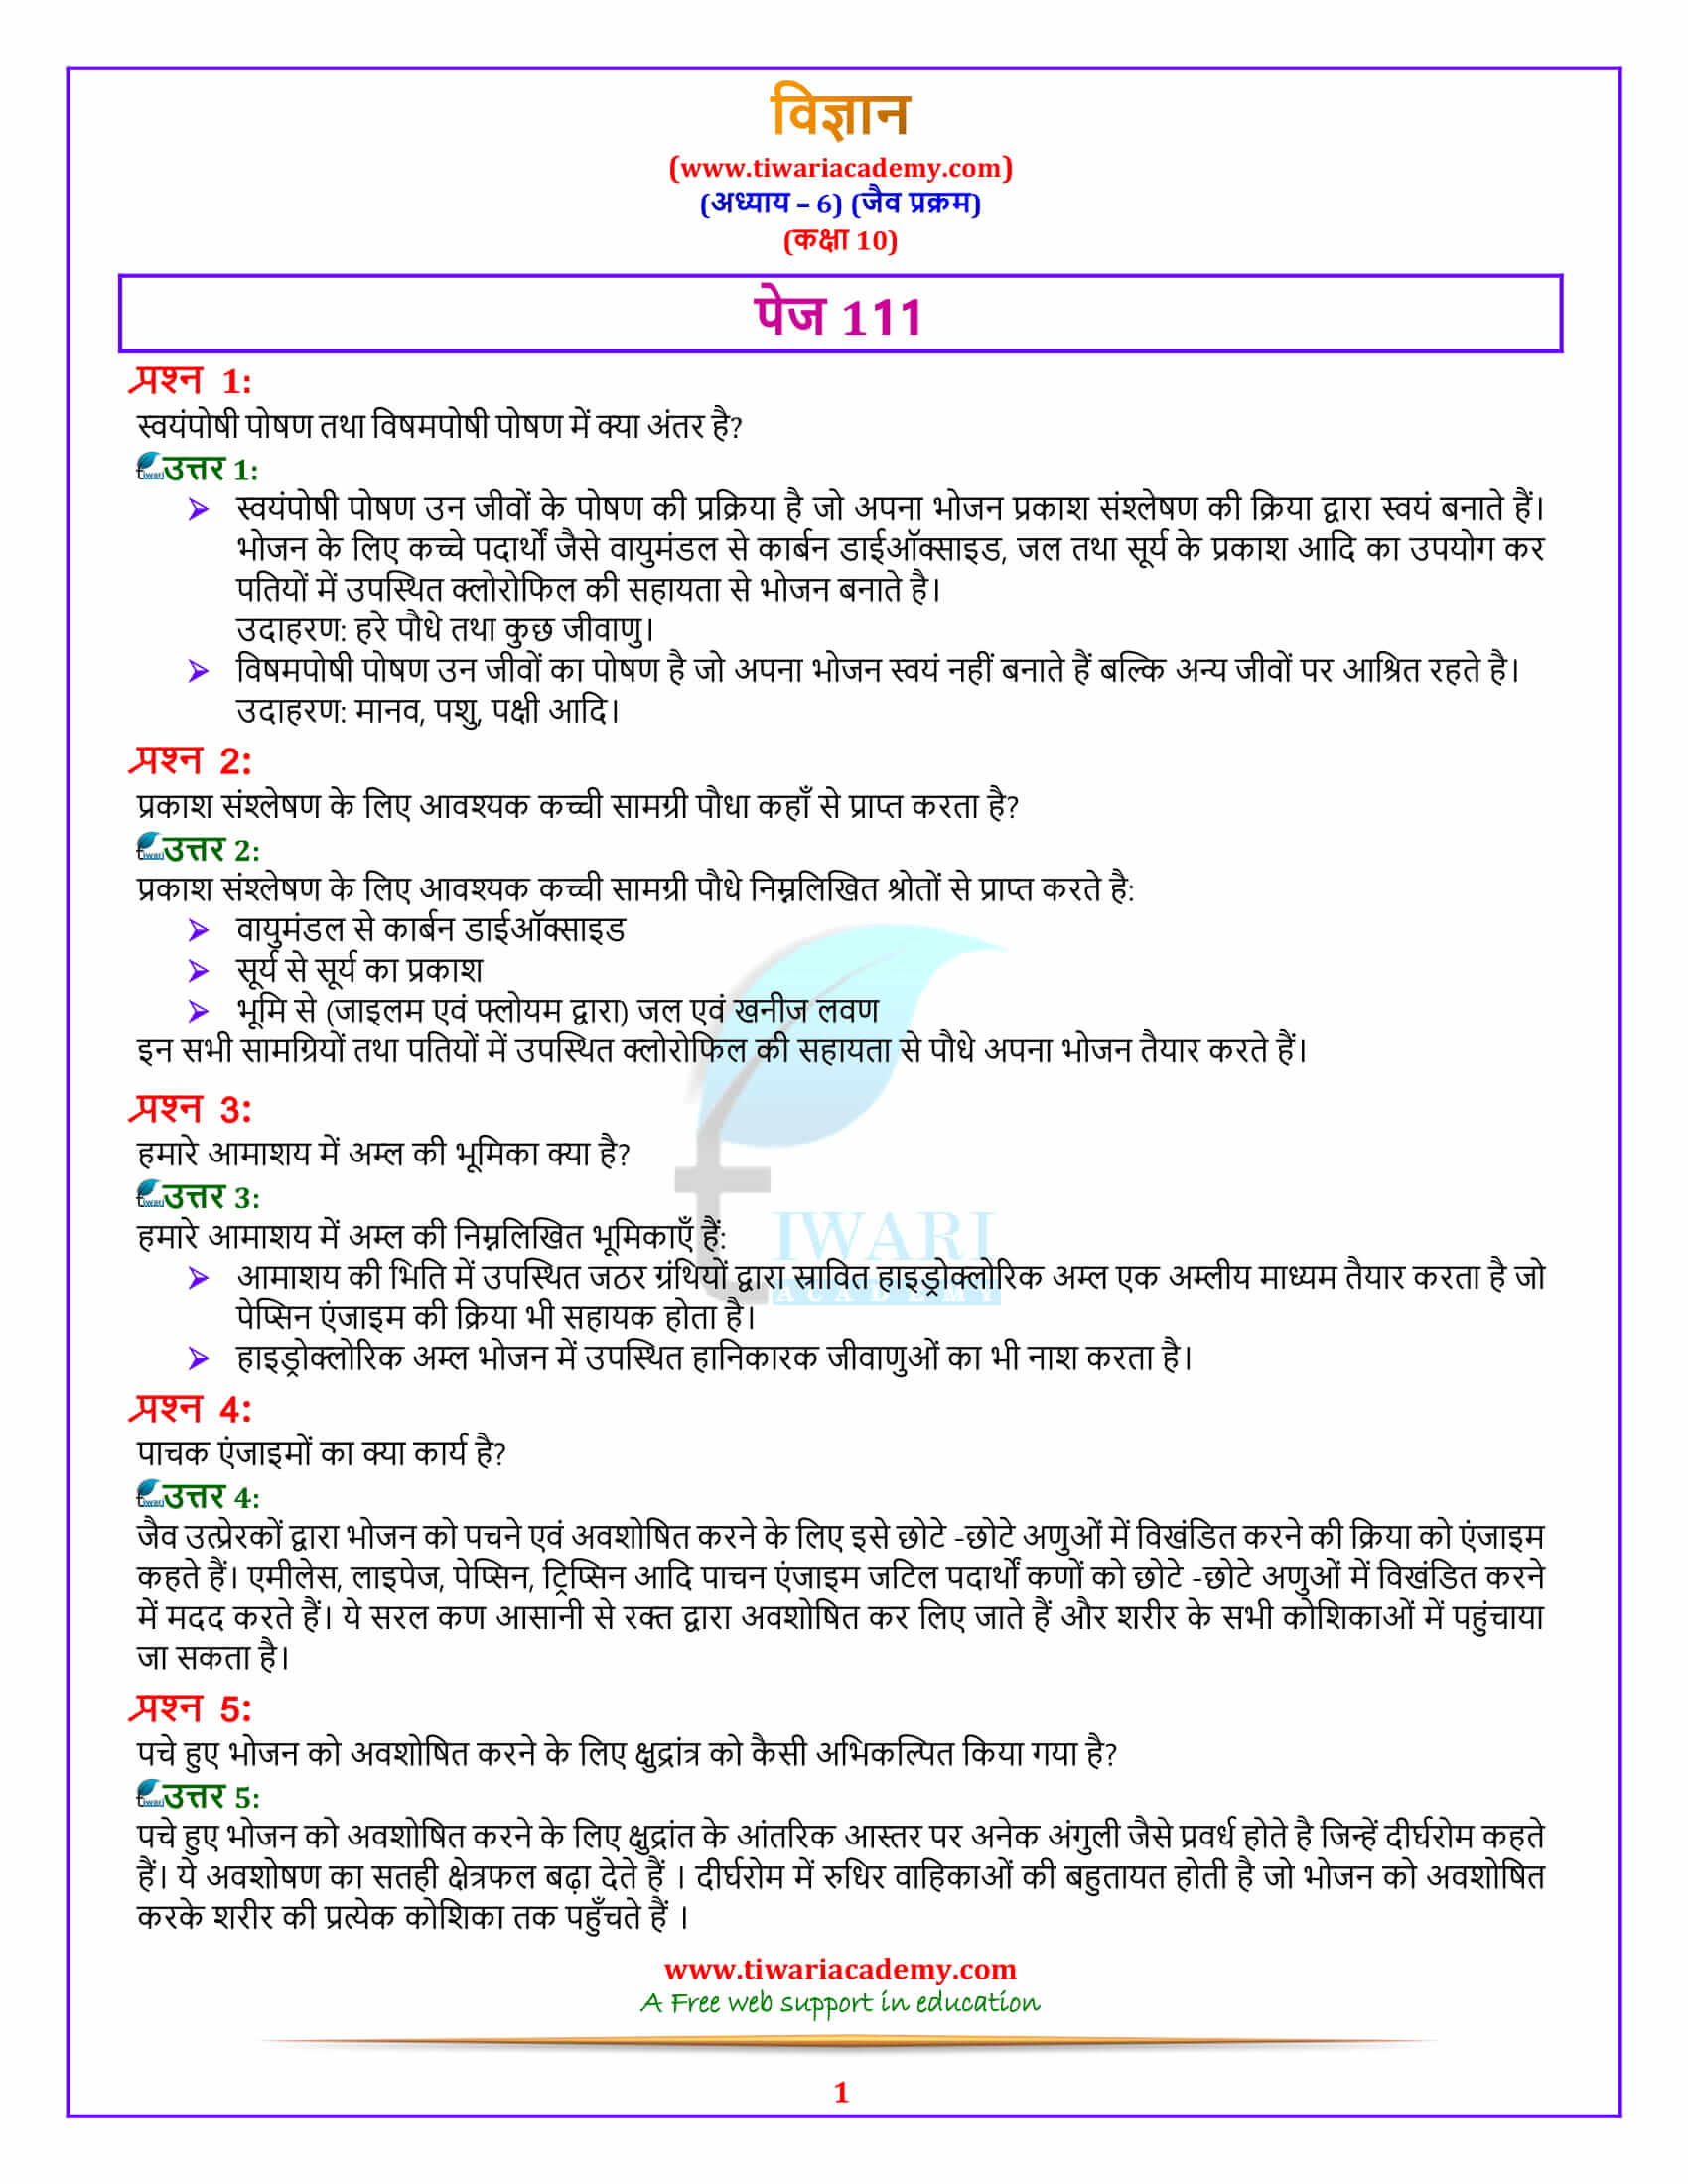 Class 10 Science Chapter 6 Life Processes पेज 111 के उत्तर